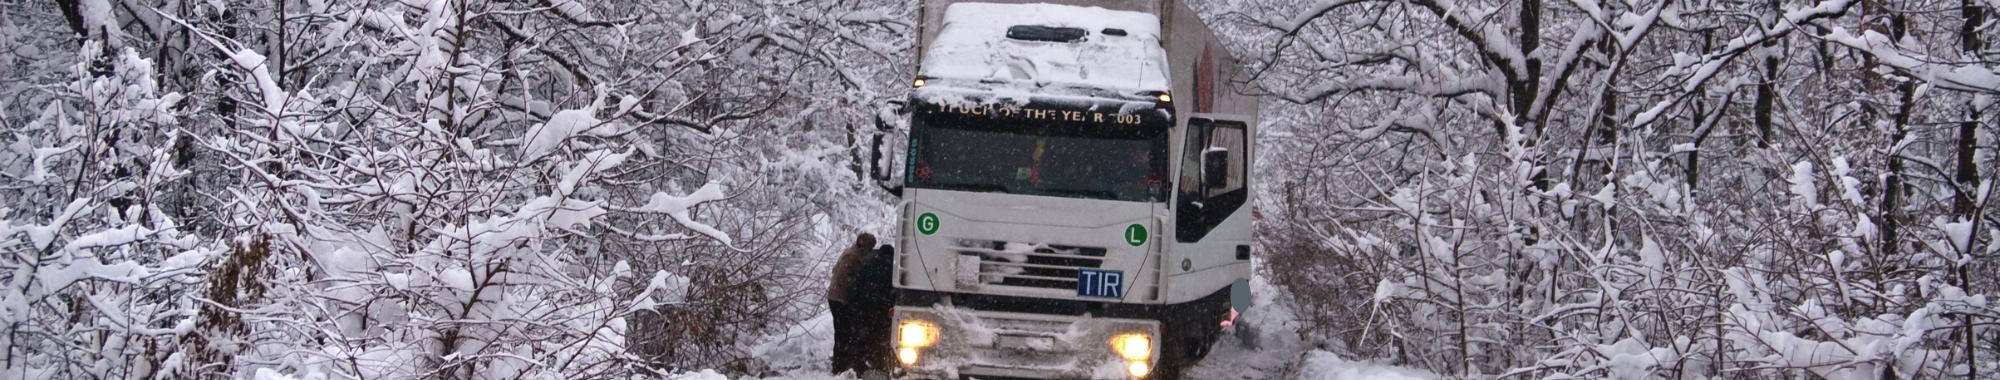 Winter Gifts For Truck Drivers UK